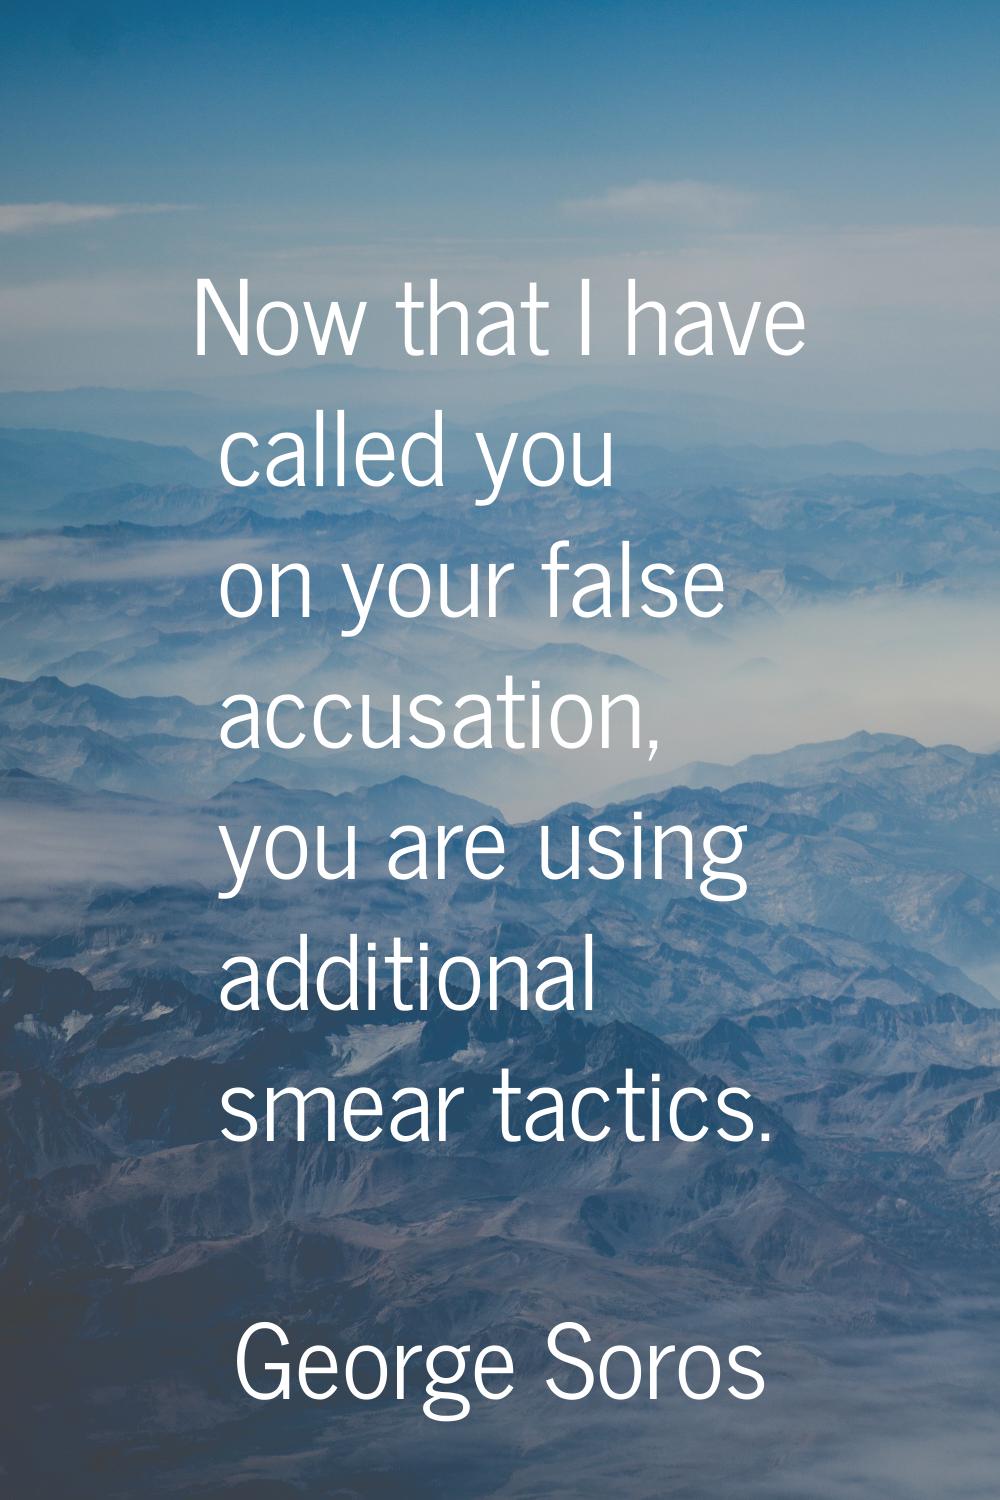 Now that I have called you on your false accusation, you are using additional smear tactics.